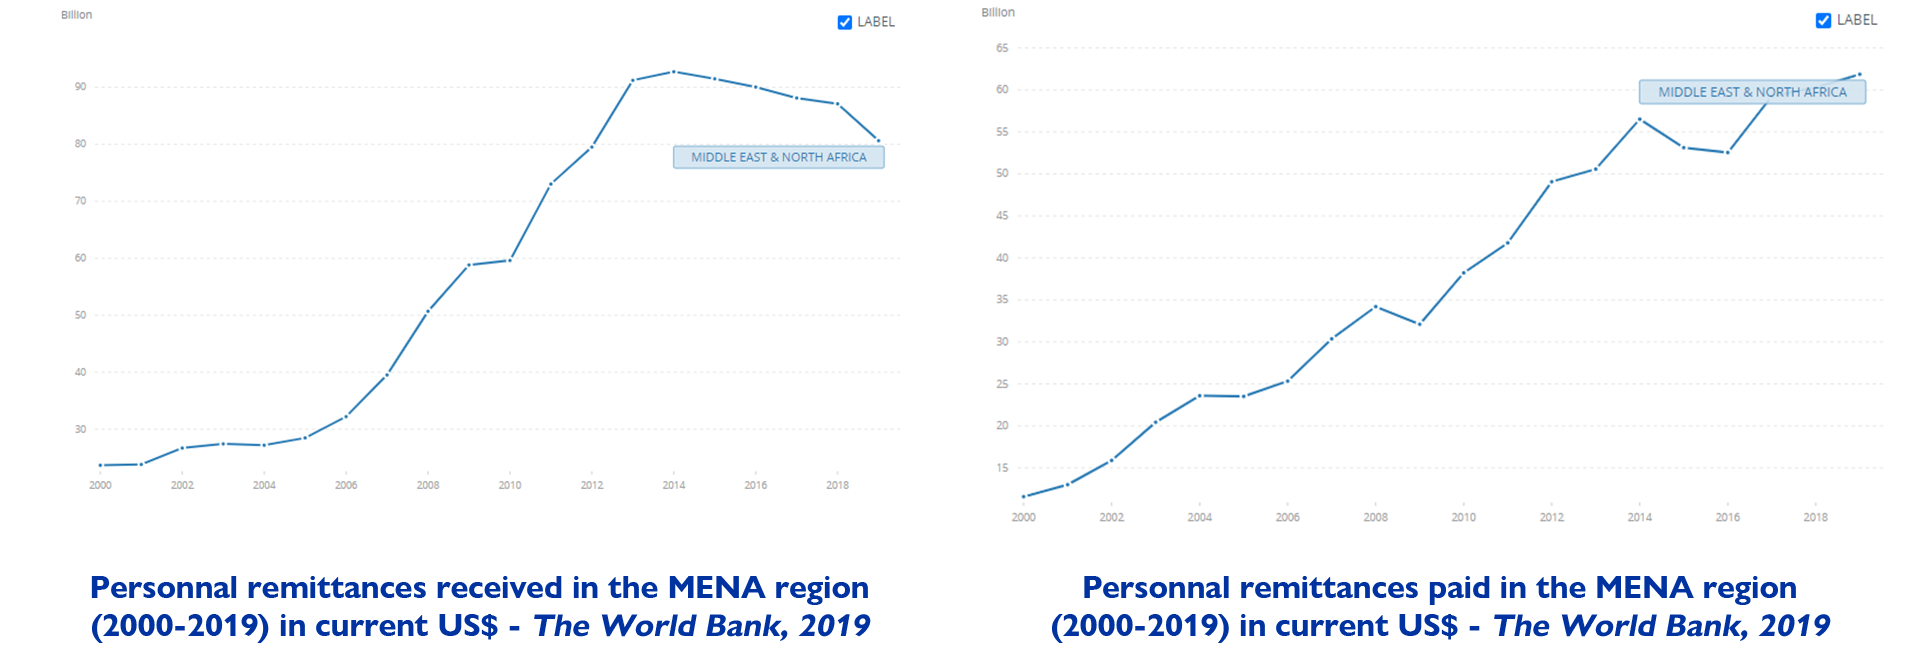 Personnal remittances in the MENA region (2000-2019) in current US$ - The World Bank, 2019